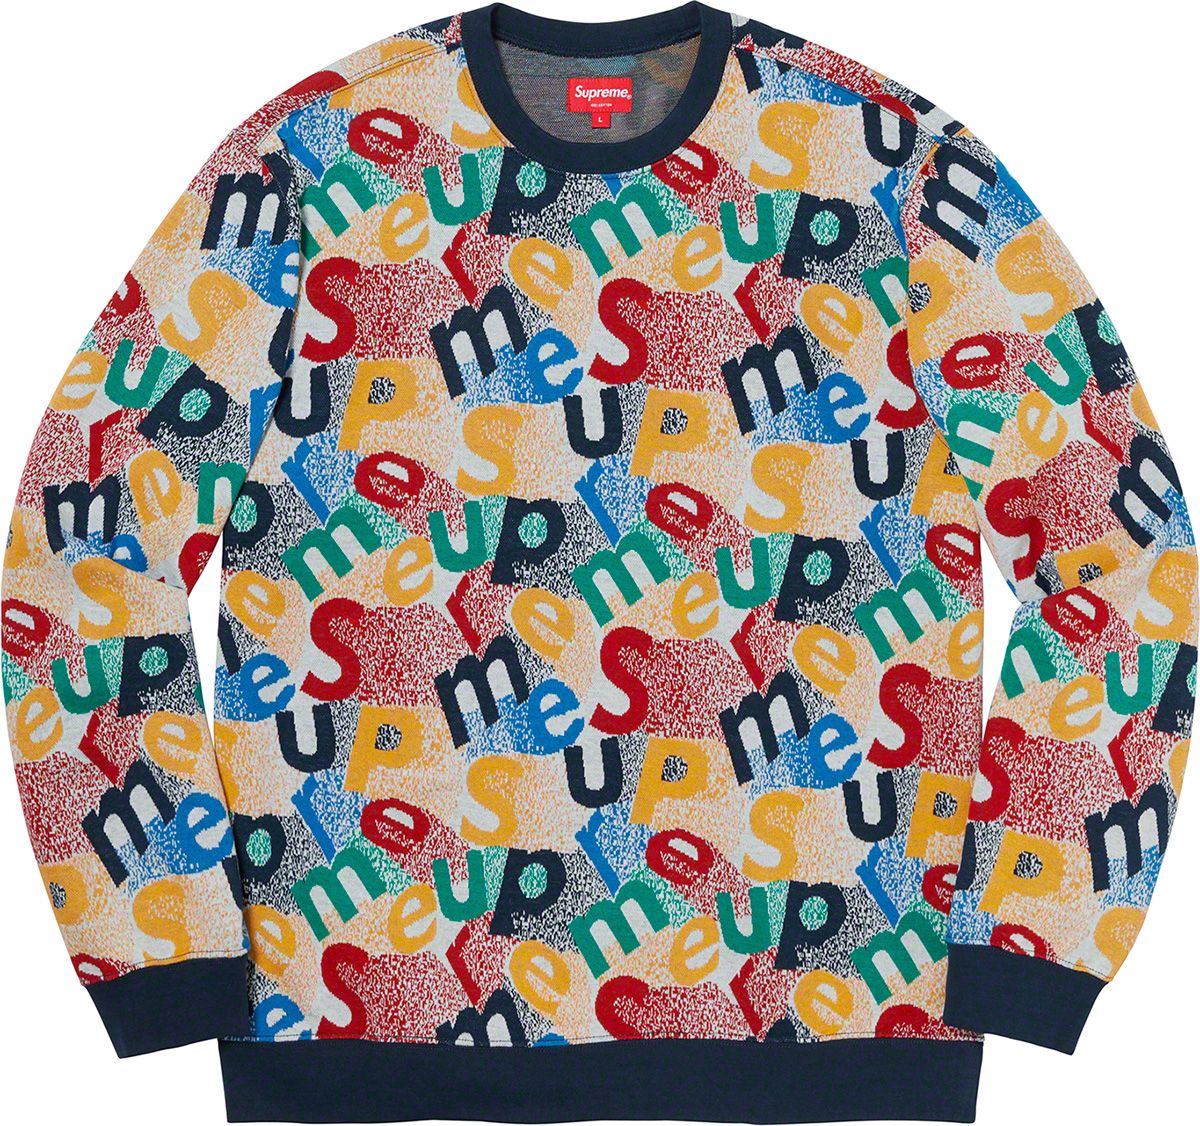 Scatter Text Crewneck - Fall/Winter 2019 Preview – Supreme